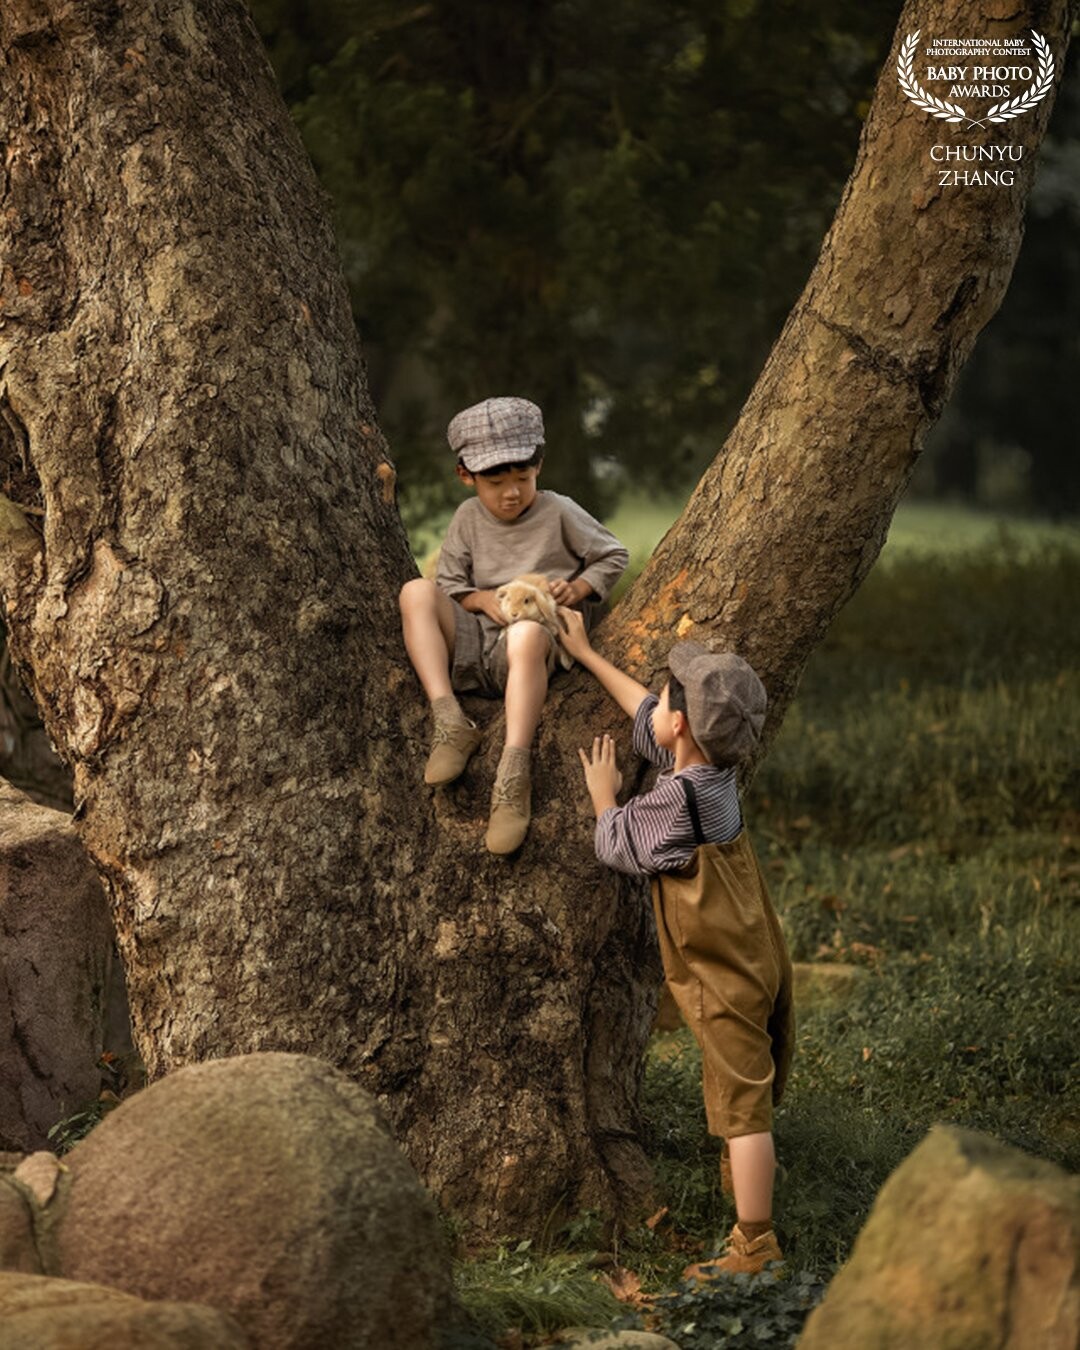 This naughty boy climbed up a tree with a bunny. He wanted to let the bunny see more of the world. And the other boy is softly touching the rabbit. They both have a deep love for the rabbit.